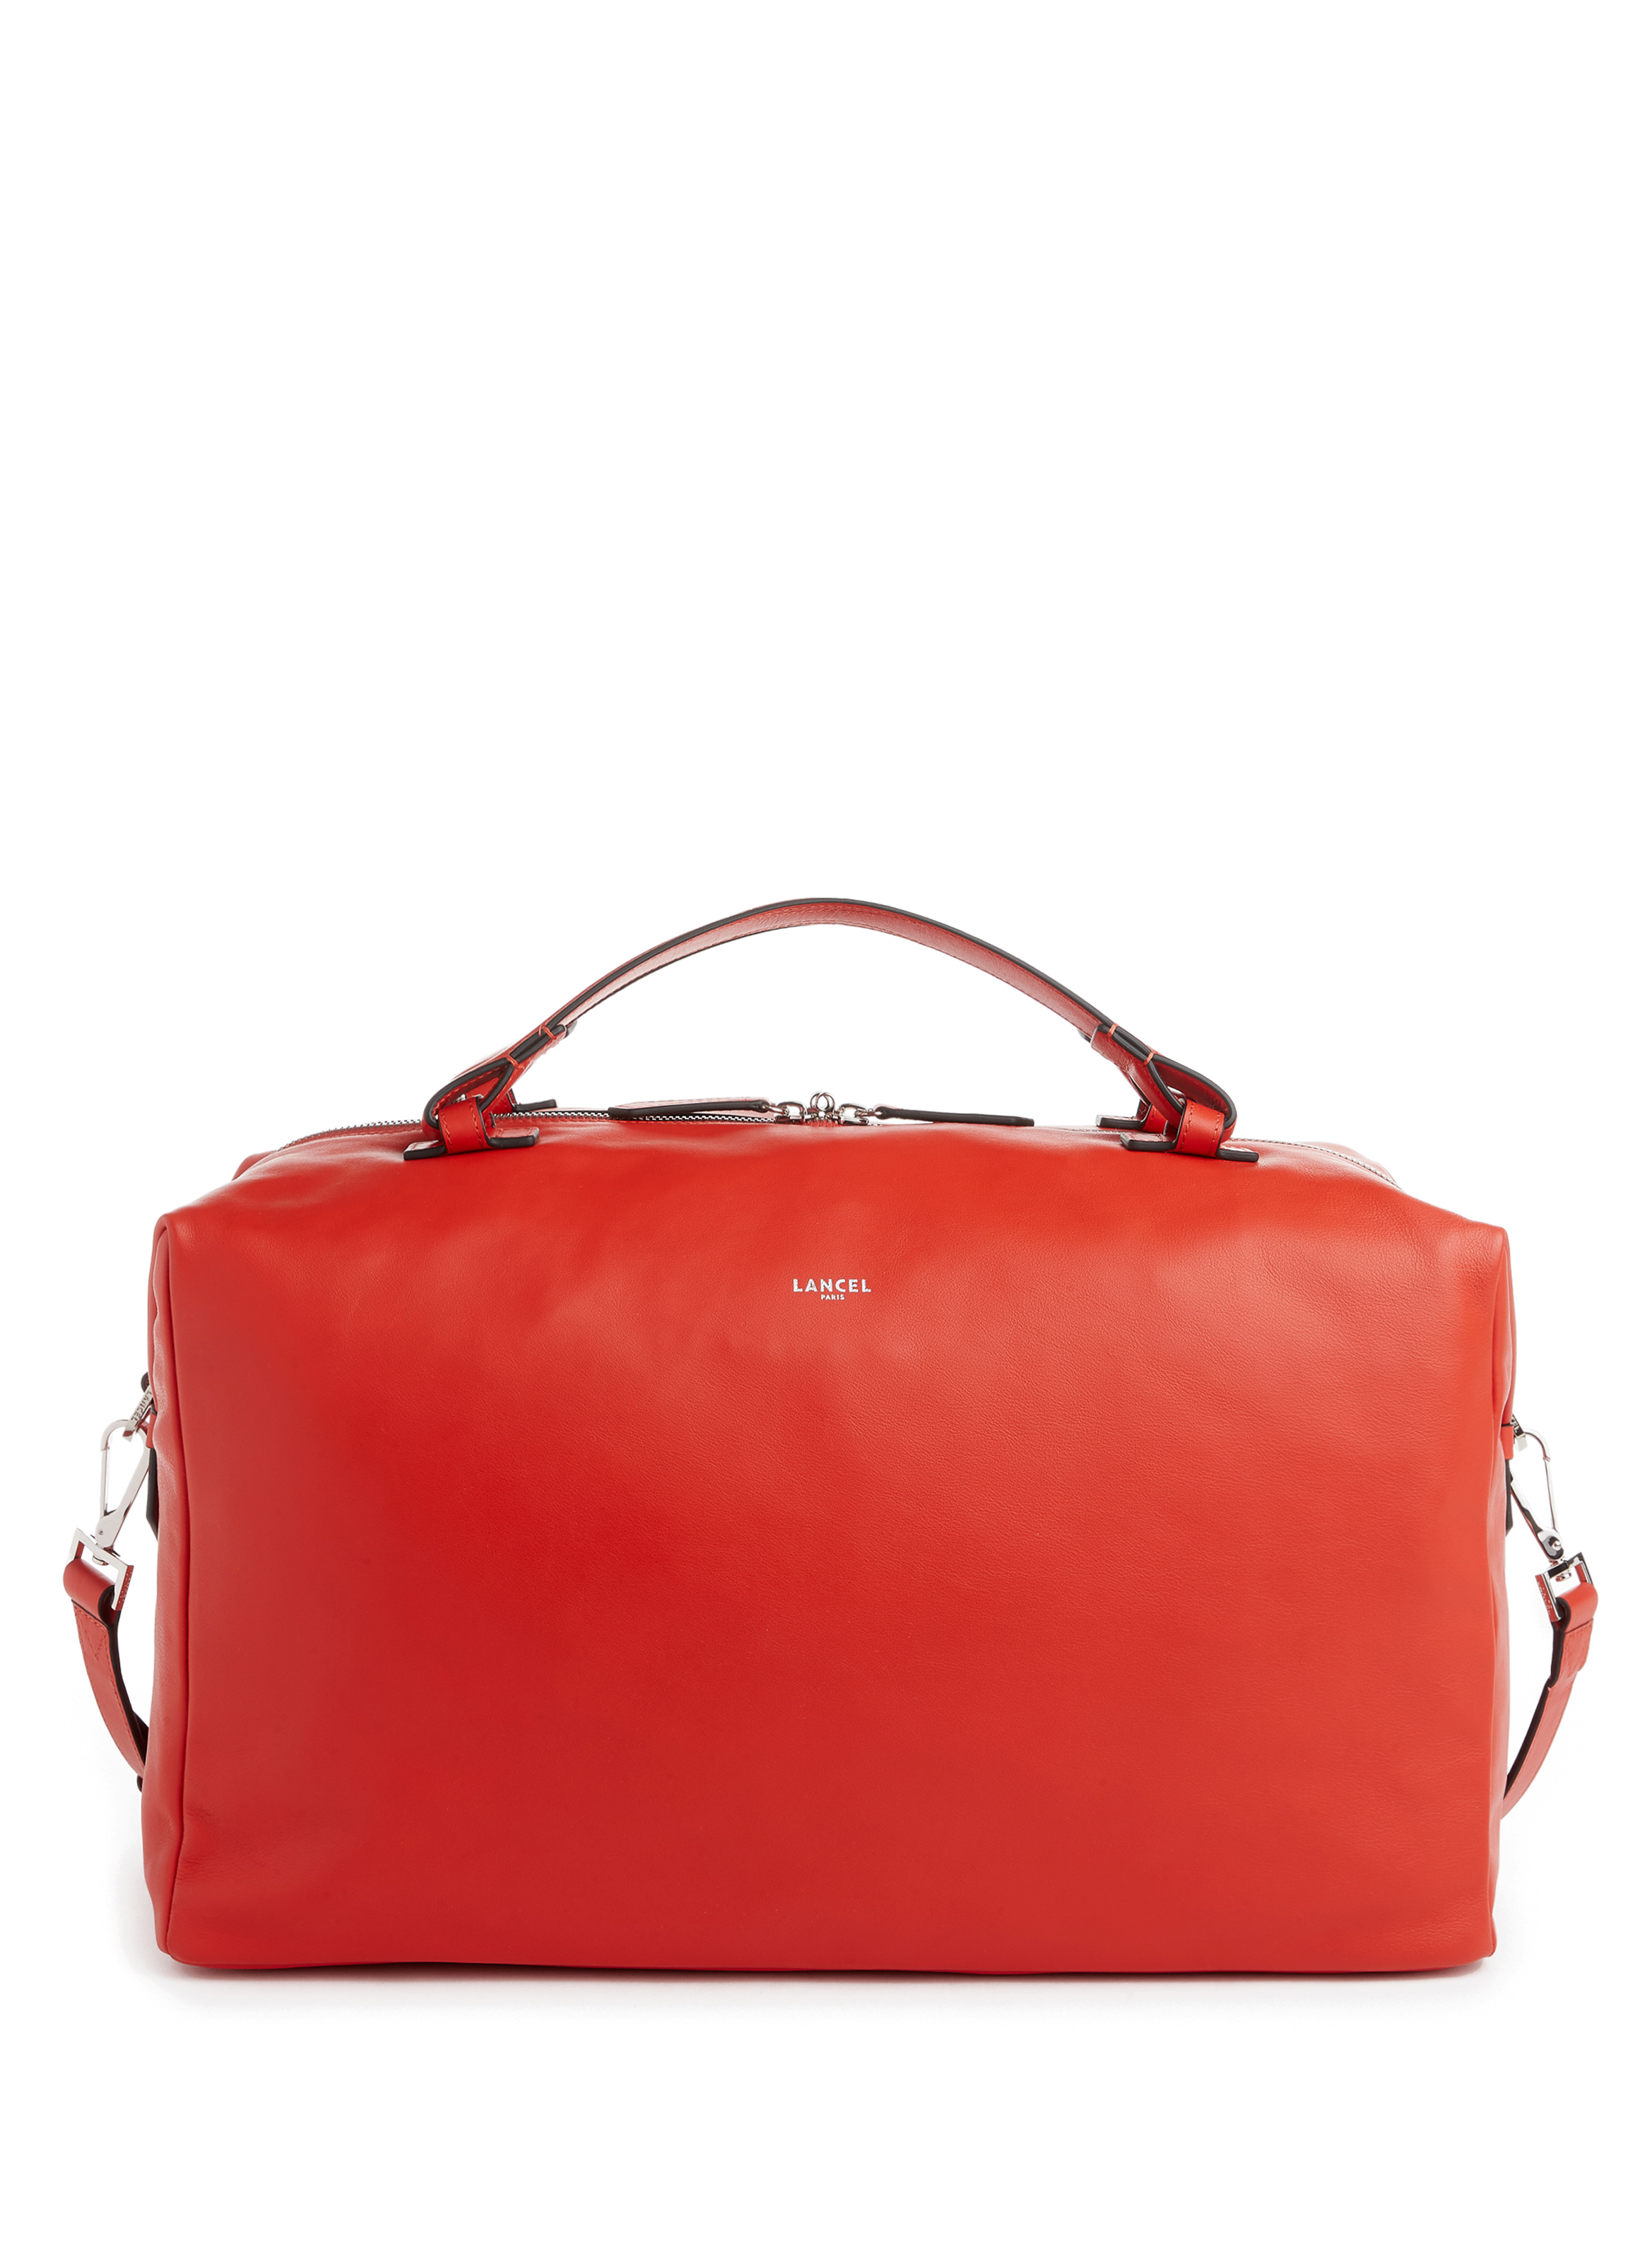 Lancel Neo Pop Leather Travel Bag in Red for Men Mens Bags Luggage and suitcases 